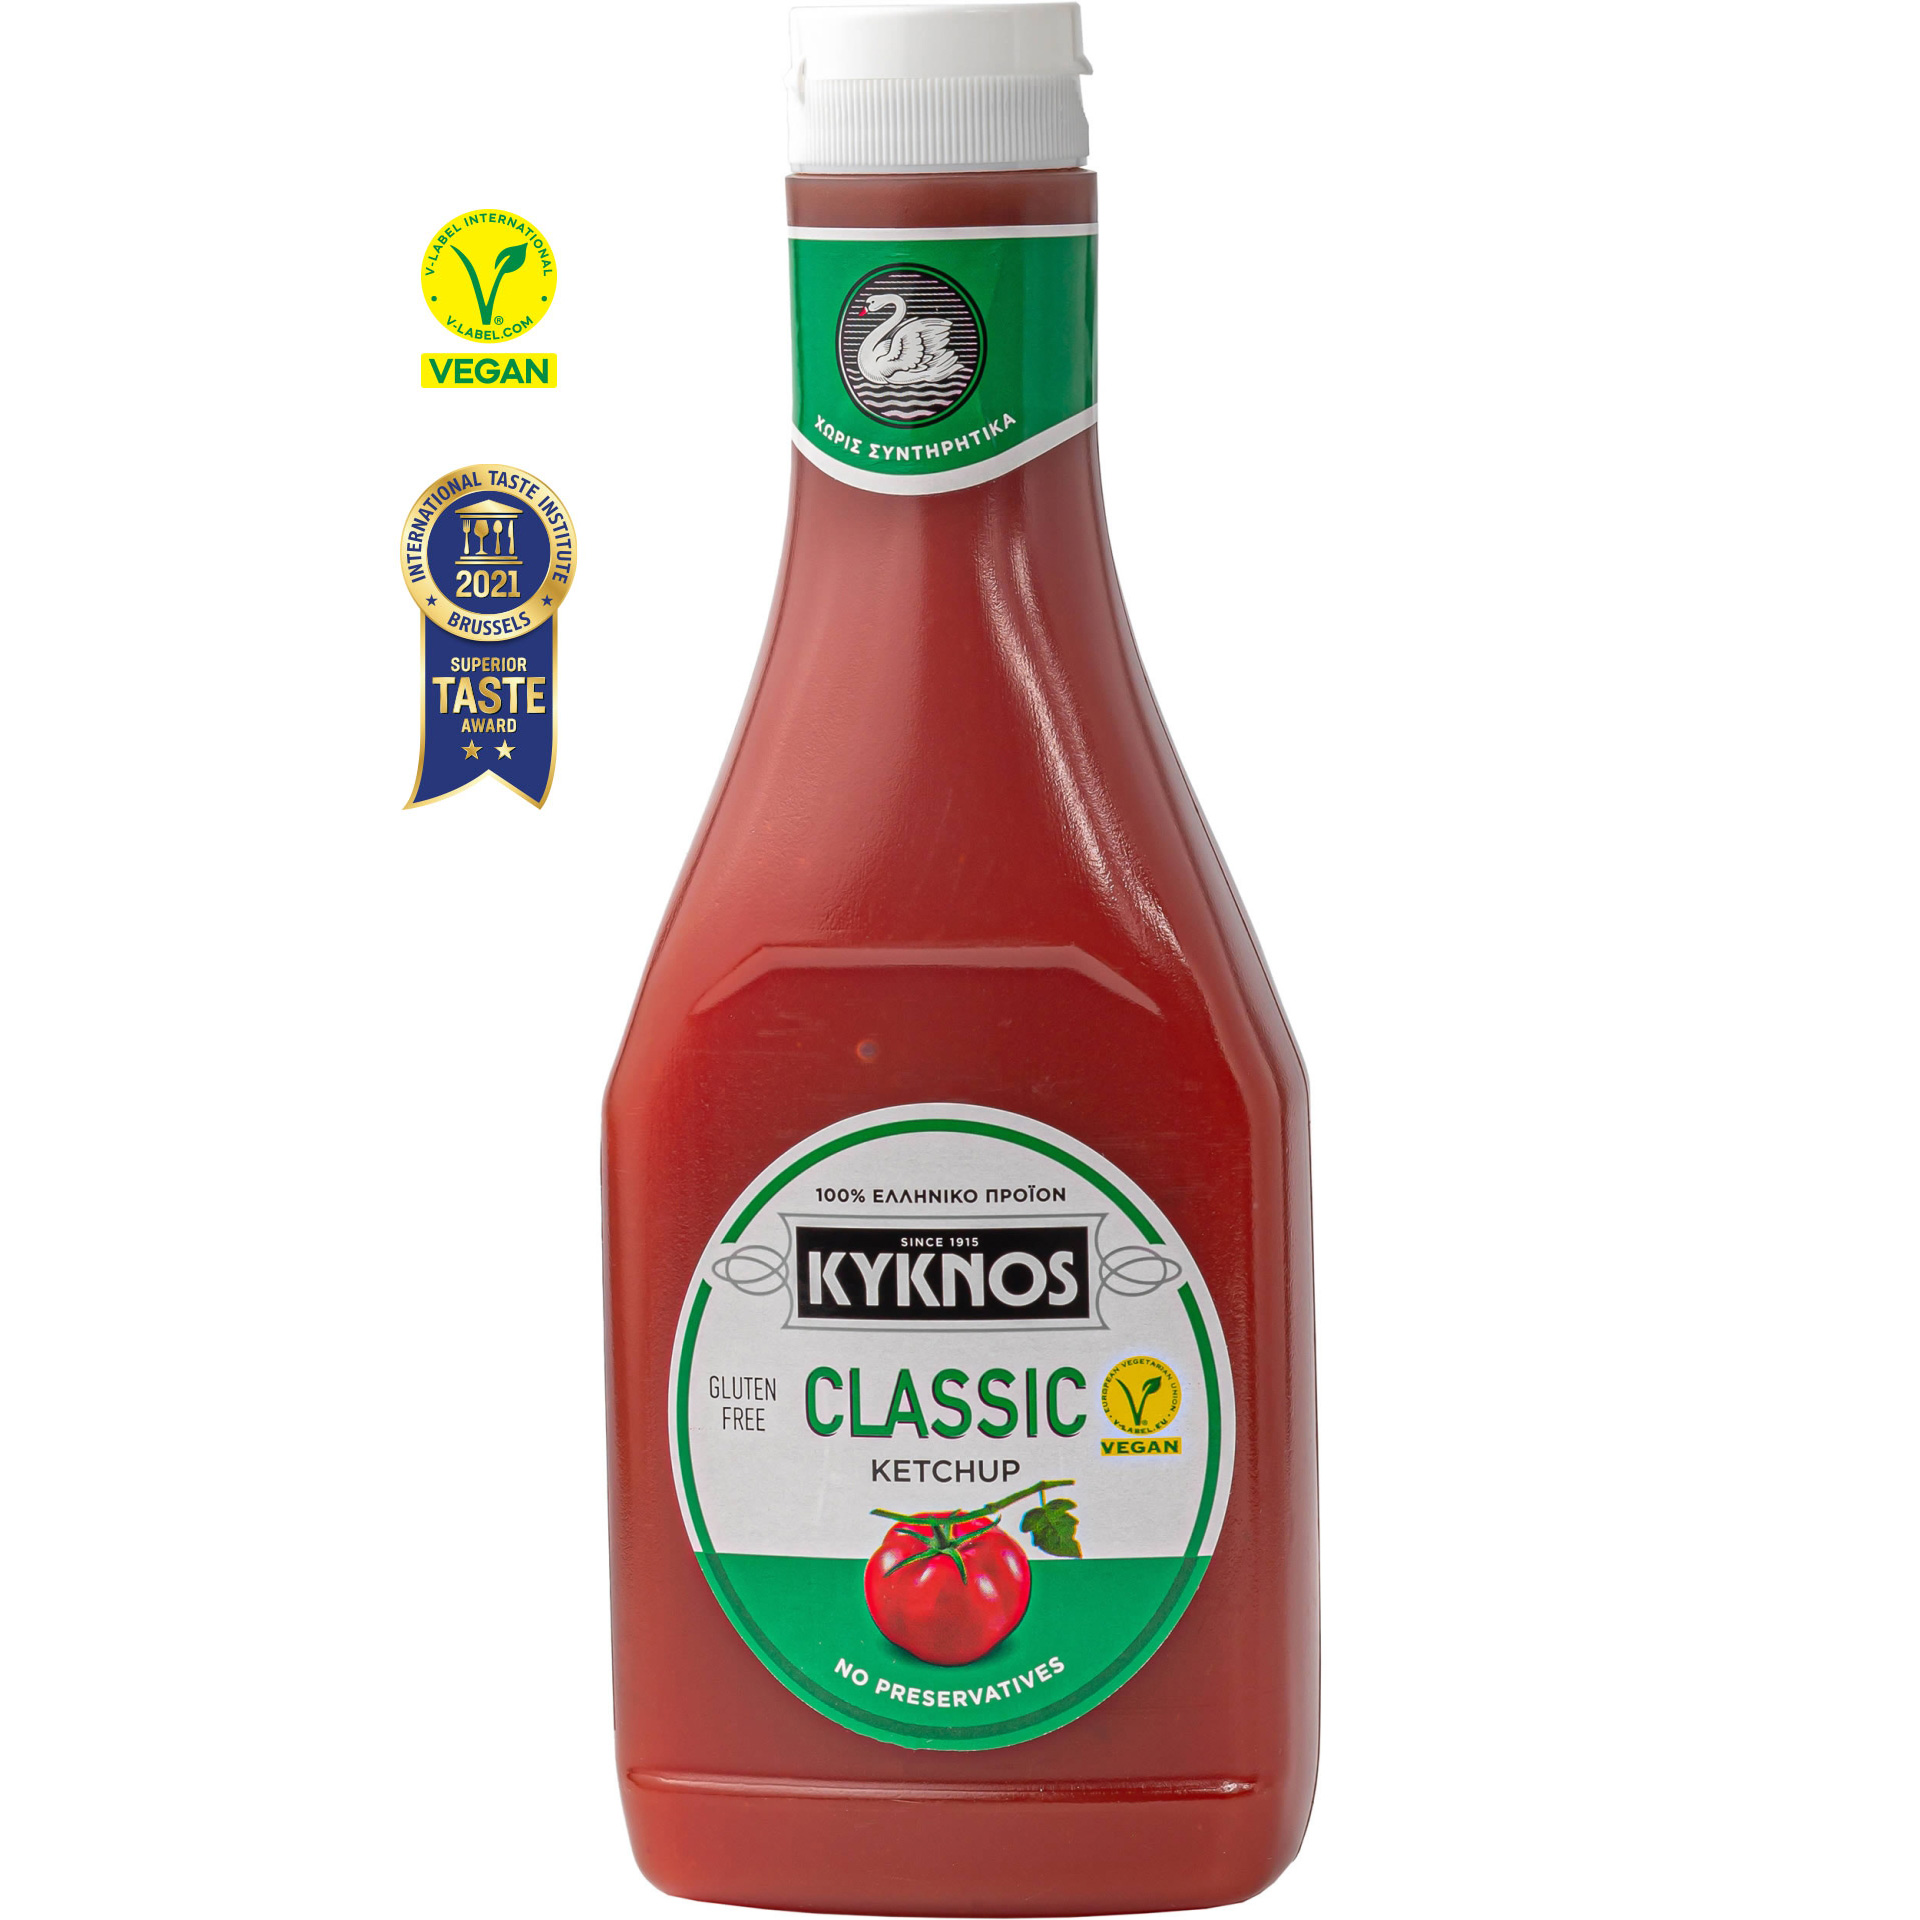 Kyknos - Ketchup "Classic" 560 g